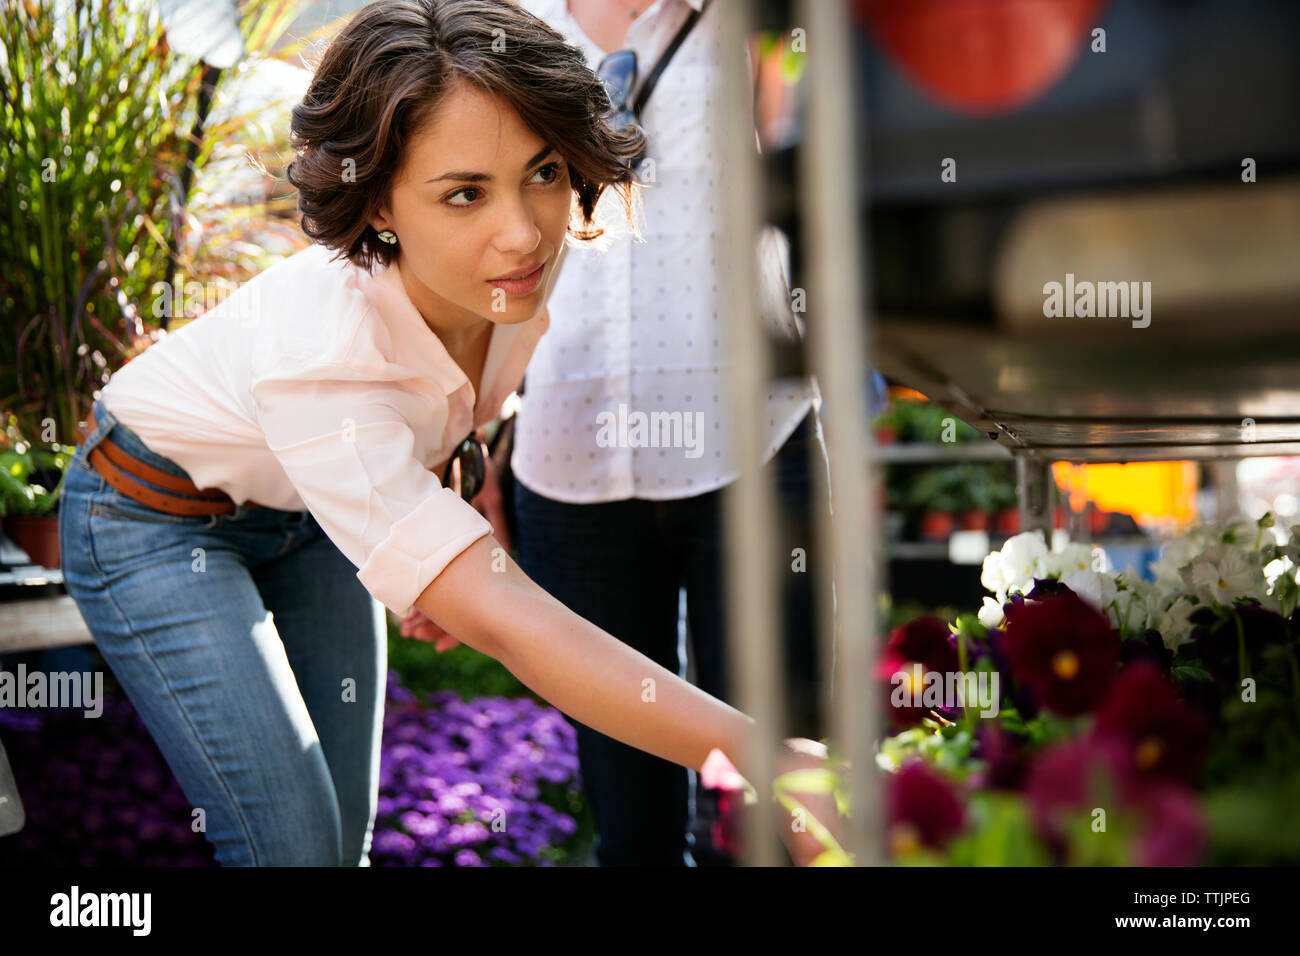 Young woman choosing flowers at shop Stock Photo